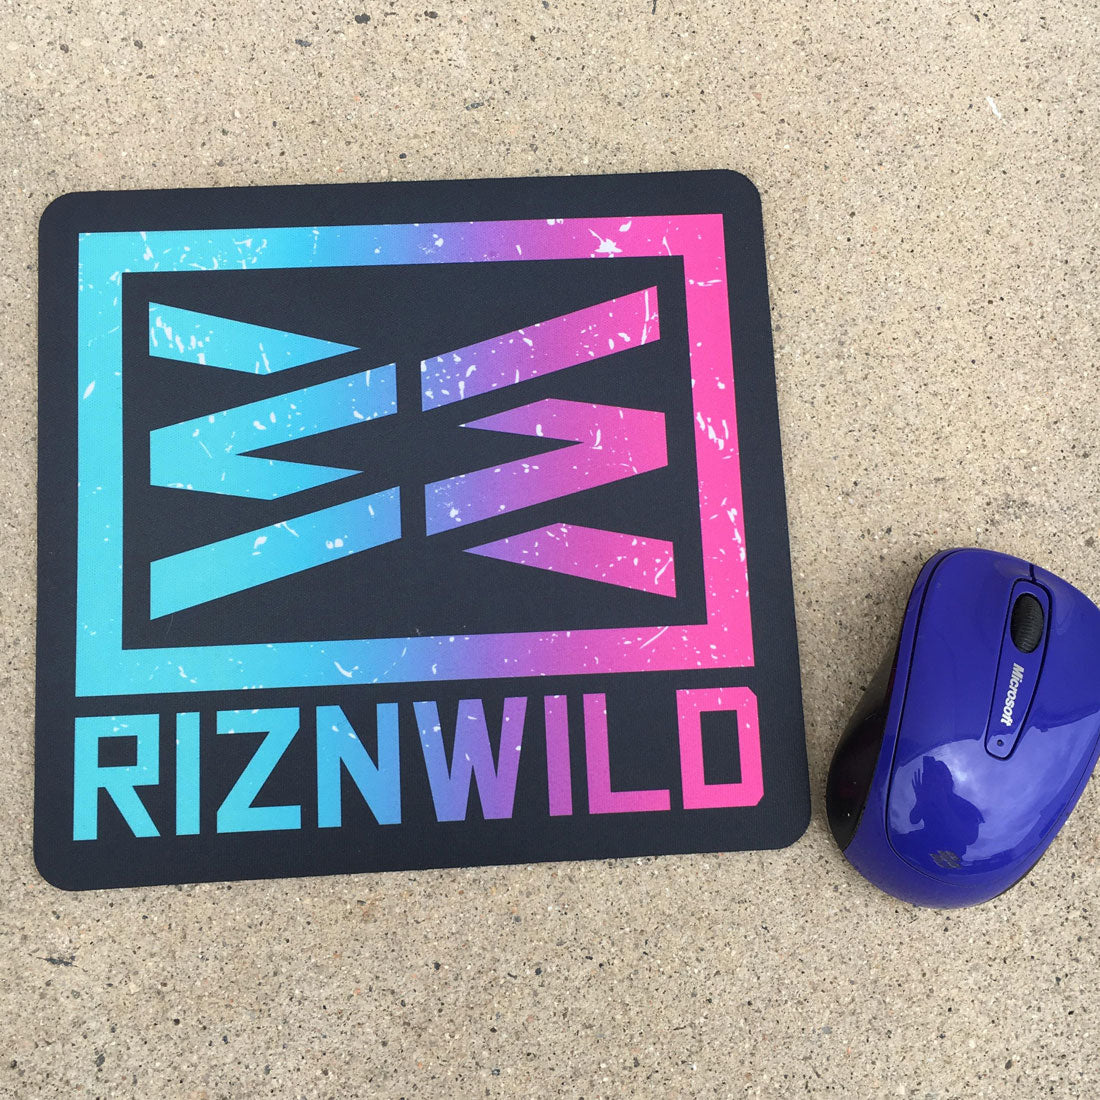 RIZNWILD | what a cool mouse pad looks like